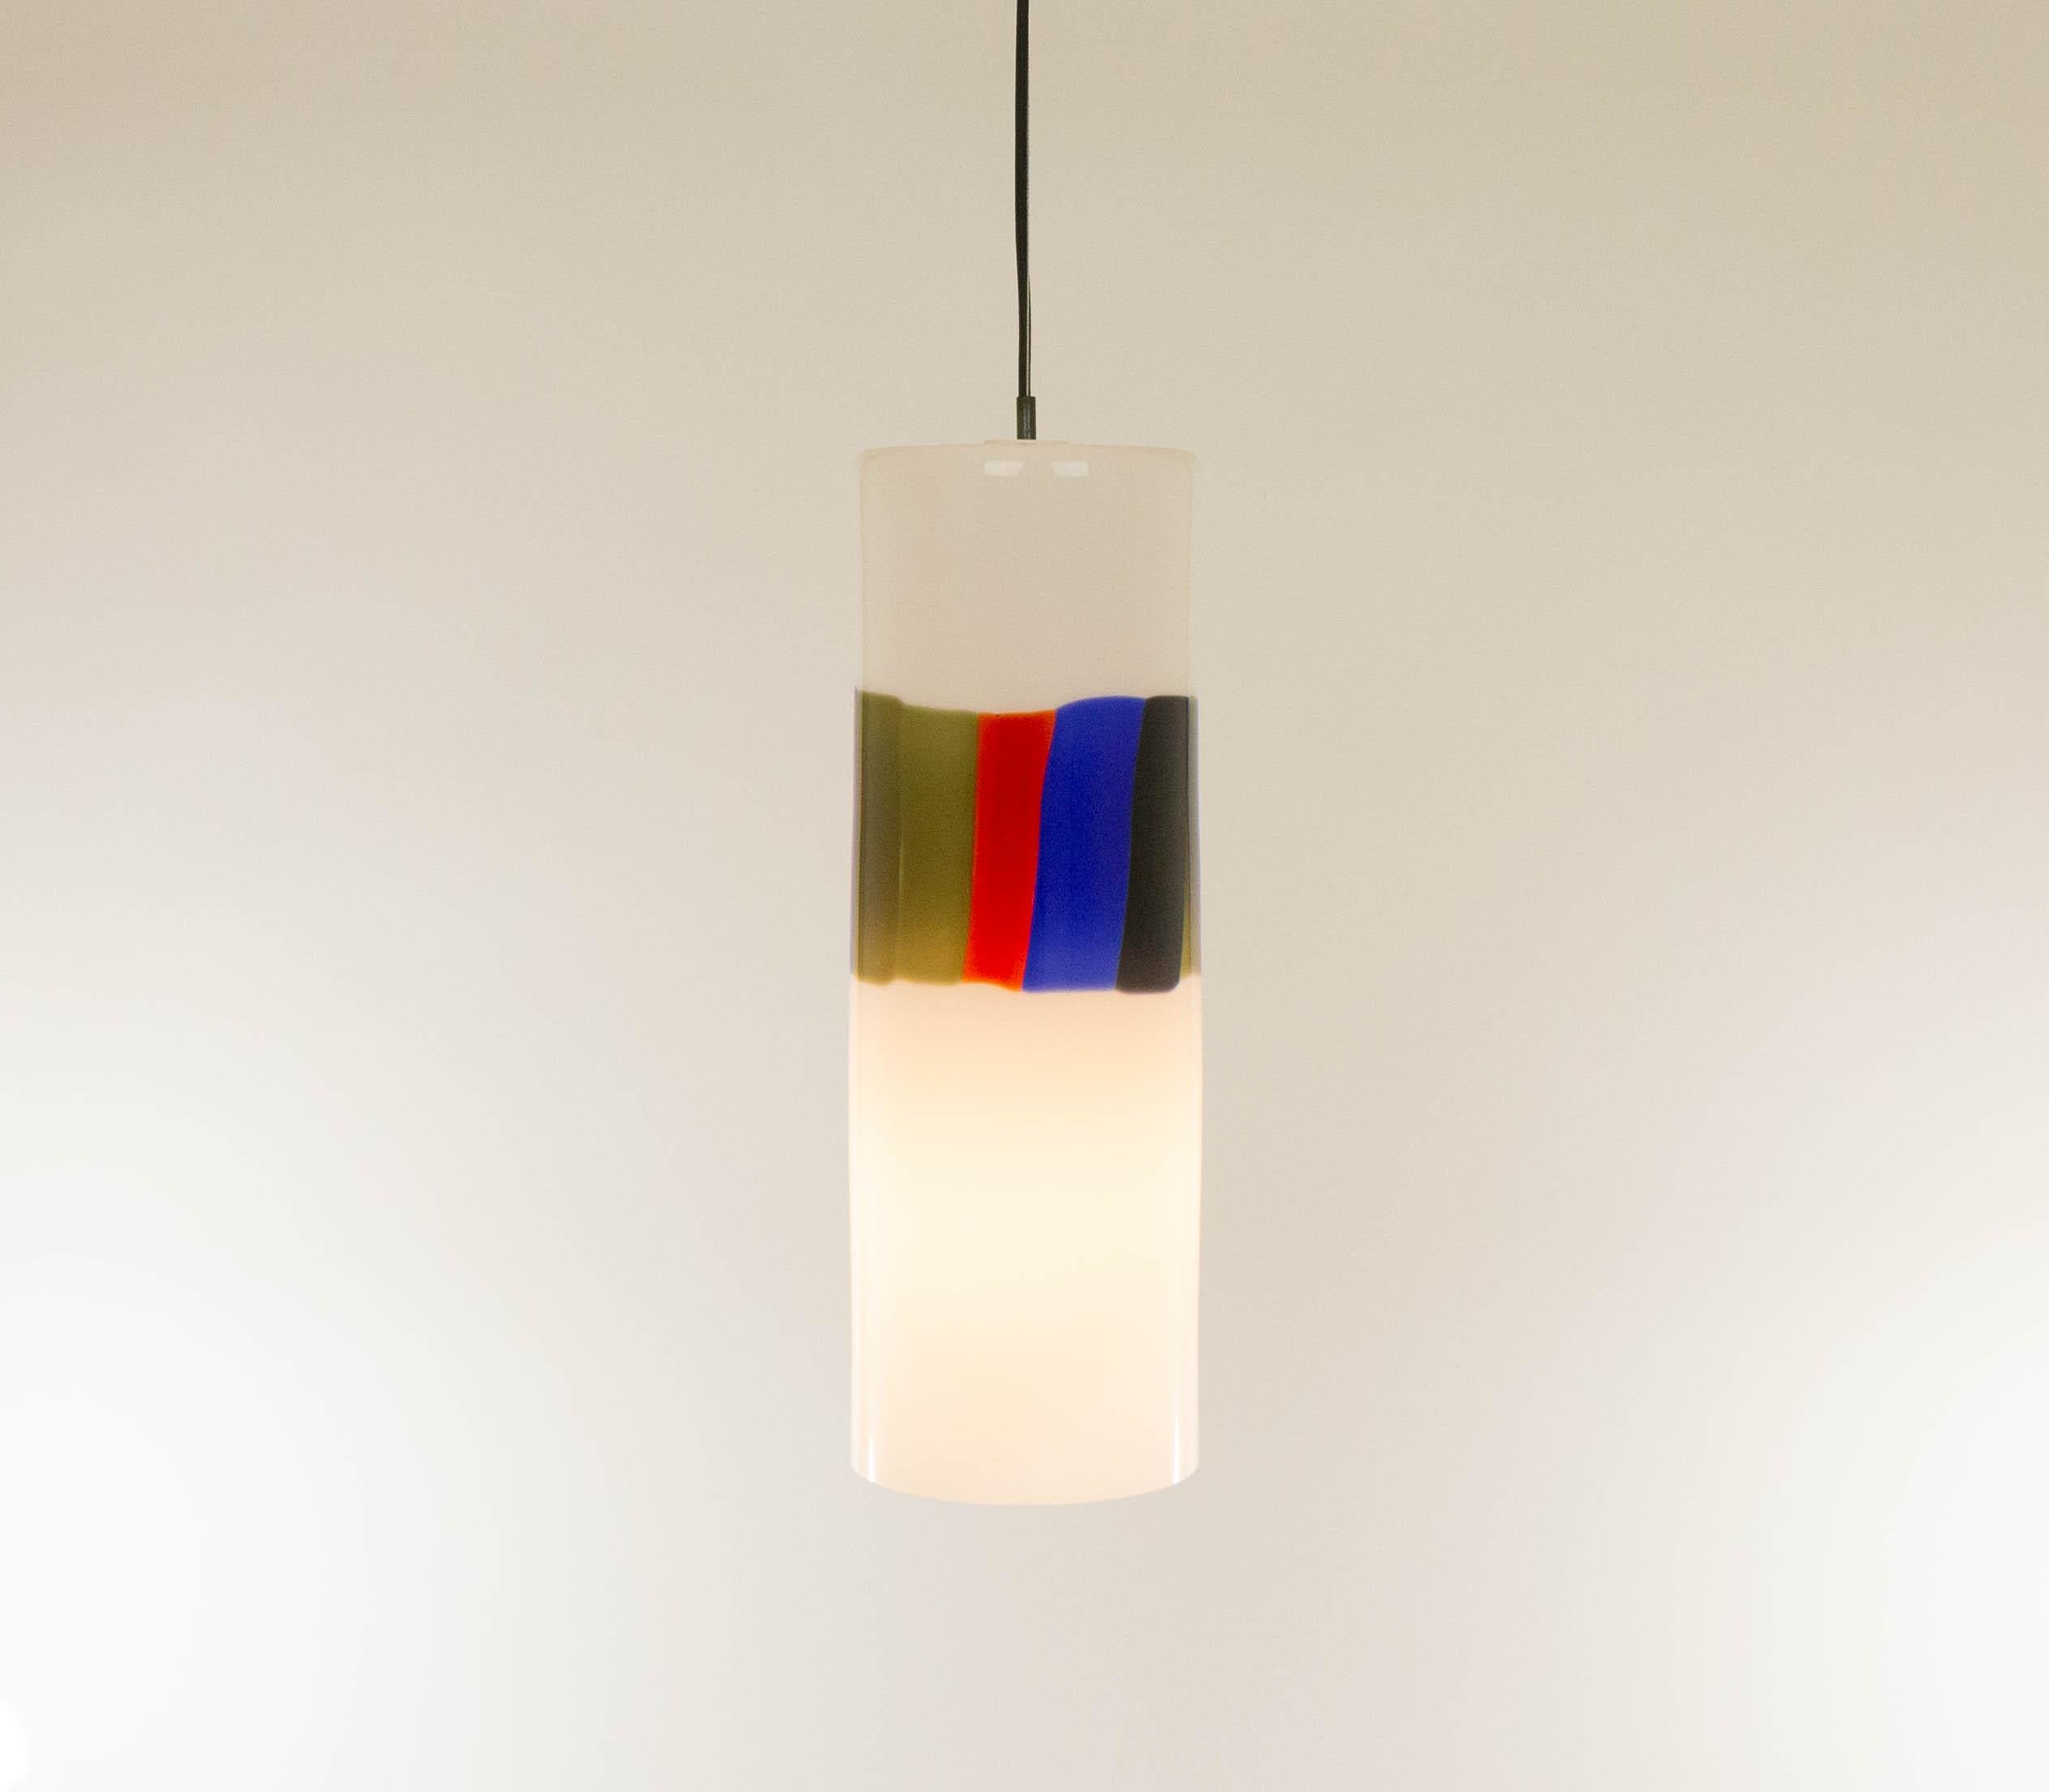 Large Model L 59 glass pendant designed in the 1960s by Alessandro Pianon for Vetreria Vistosi in Murano.

The glass is white, with a ring of vertical colored stripes of about 15 cm in length. It is in very good vintage condition and comes with